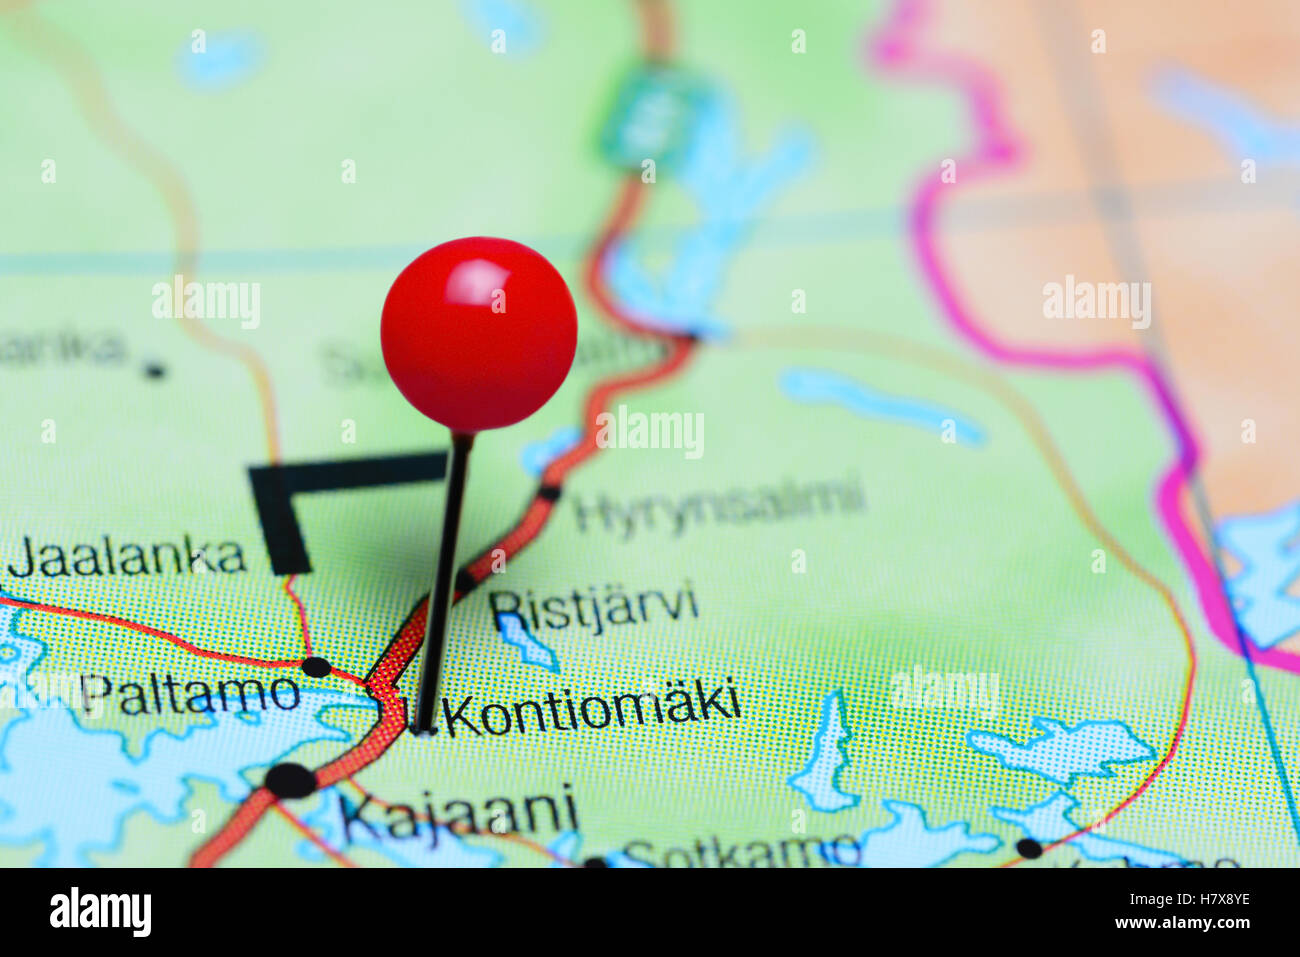 Kontiomaki pinned on a map of Finland Stock Photo